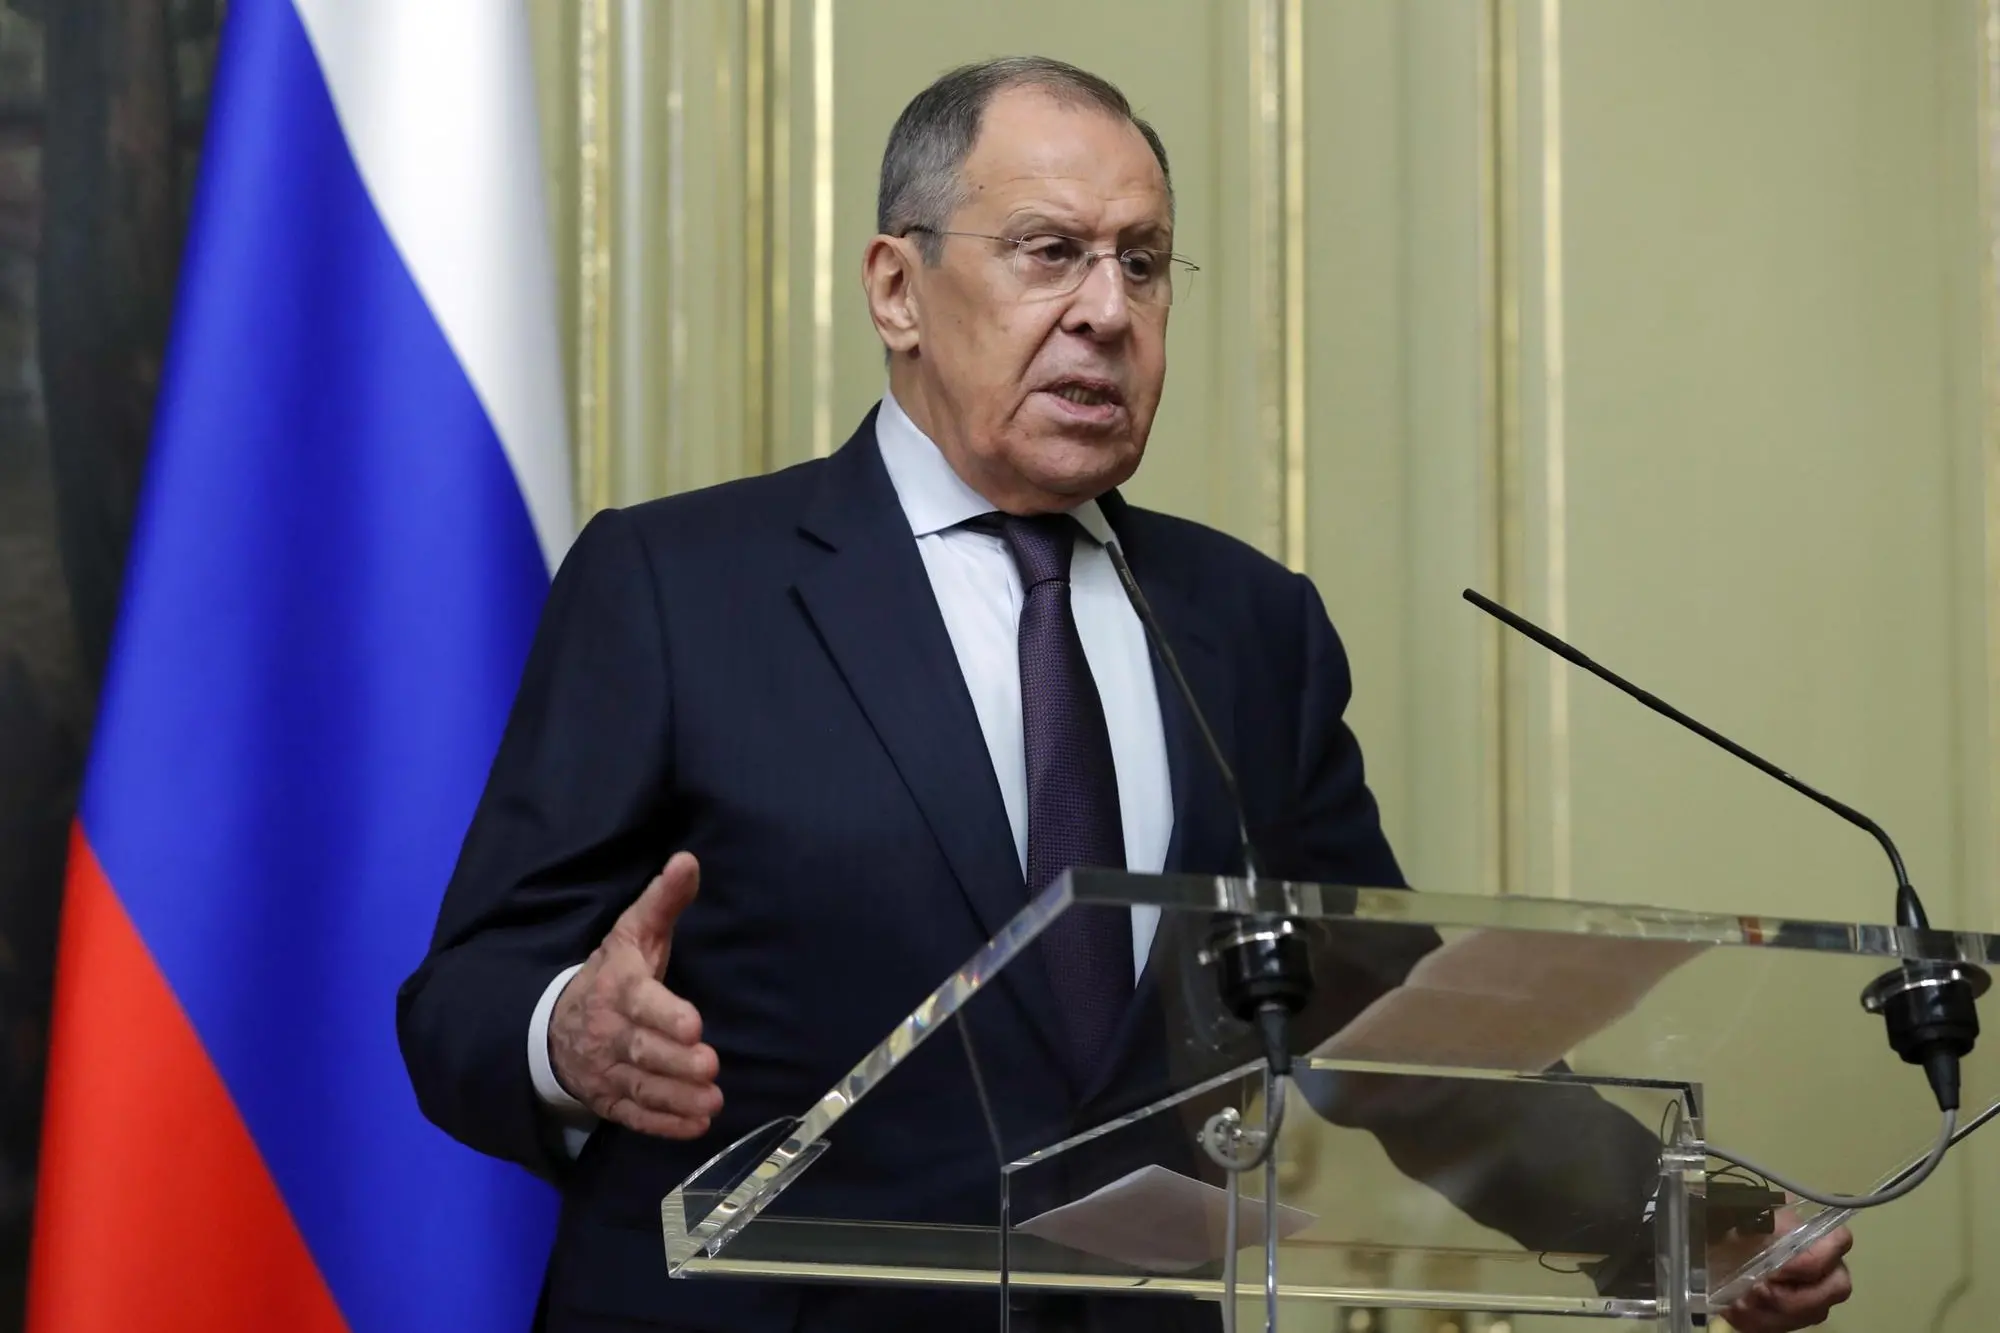 Russia's Foreign Minister Sergei Lavrov attends a joint press conference with Somalia's Foreign Minister following their talks in Moscow, Russia, 26 May 2023. ANSA/MAXIM SHIPENKOV